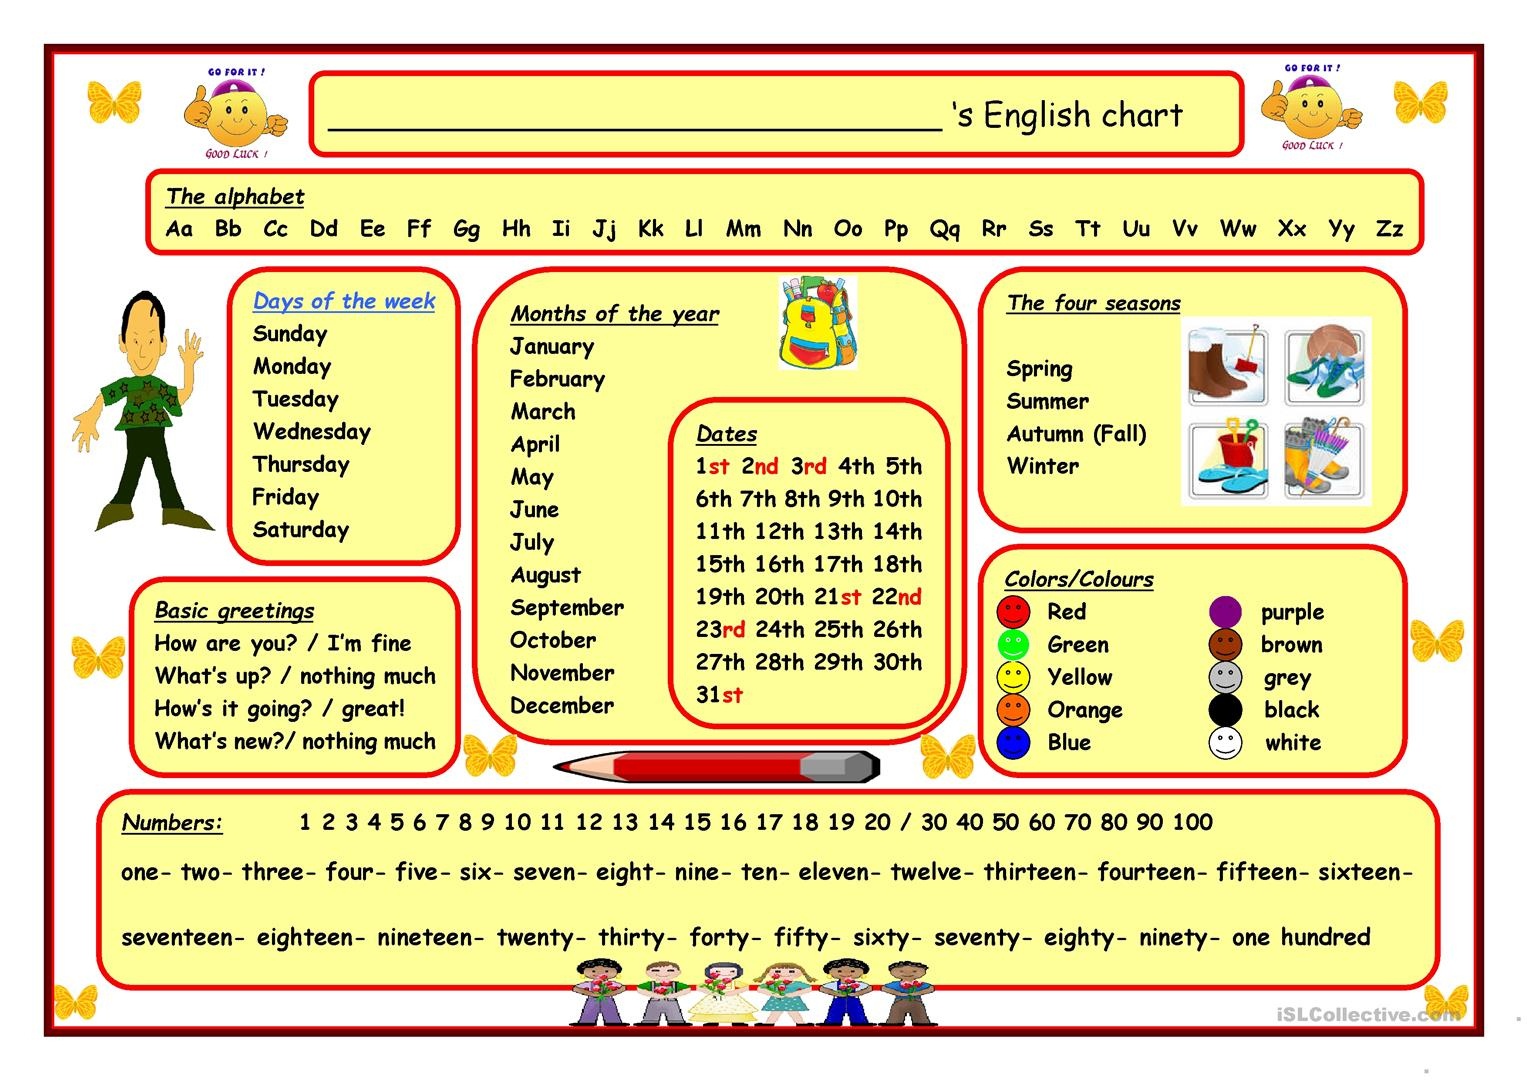 English (Wall) Chart Worksheet - Free Esl Printable Worksheets Made - Free Printable Months Of The Year Chart